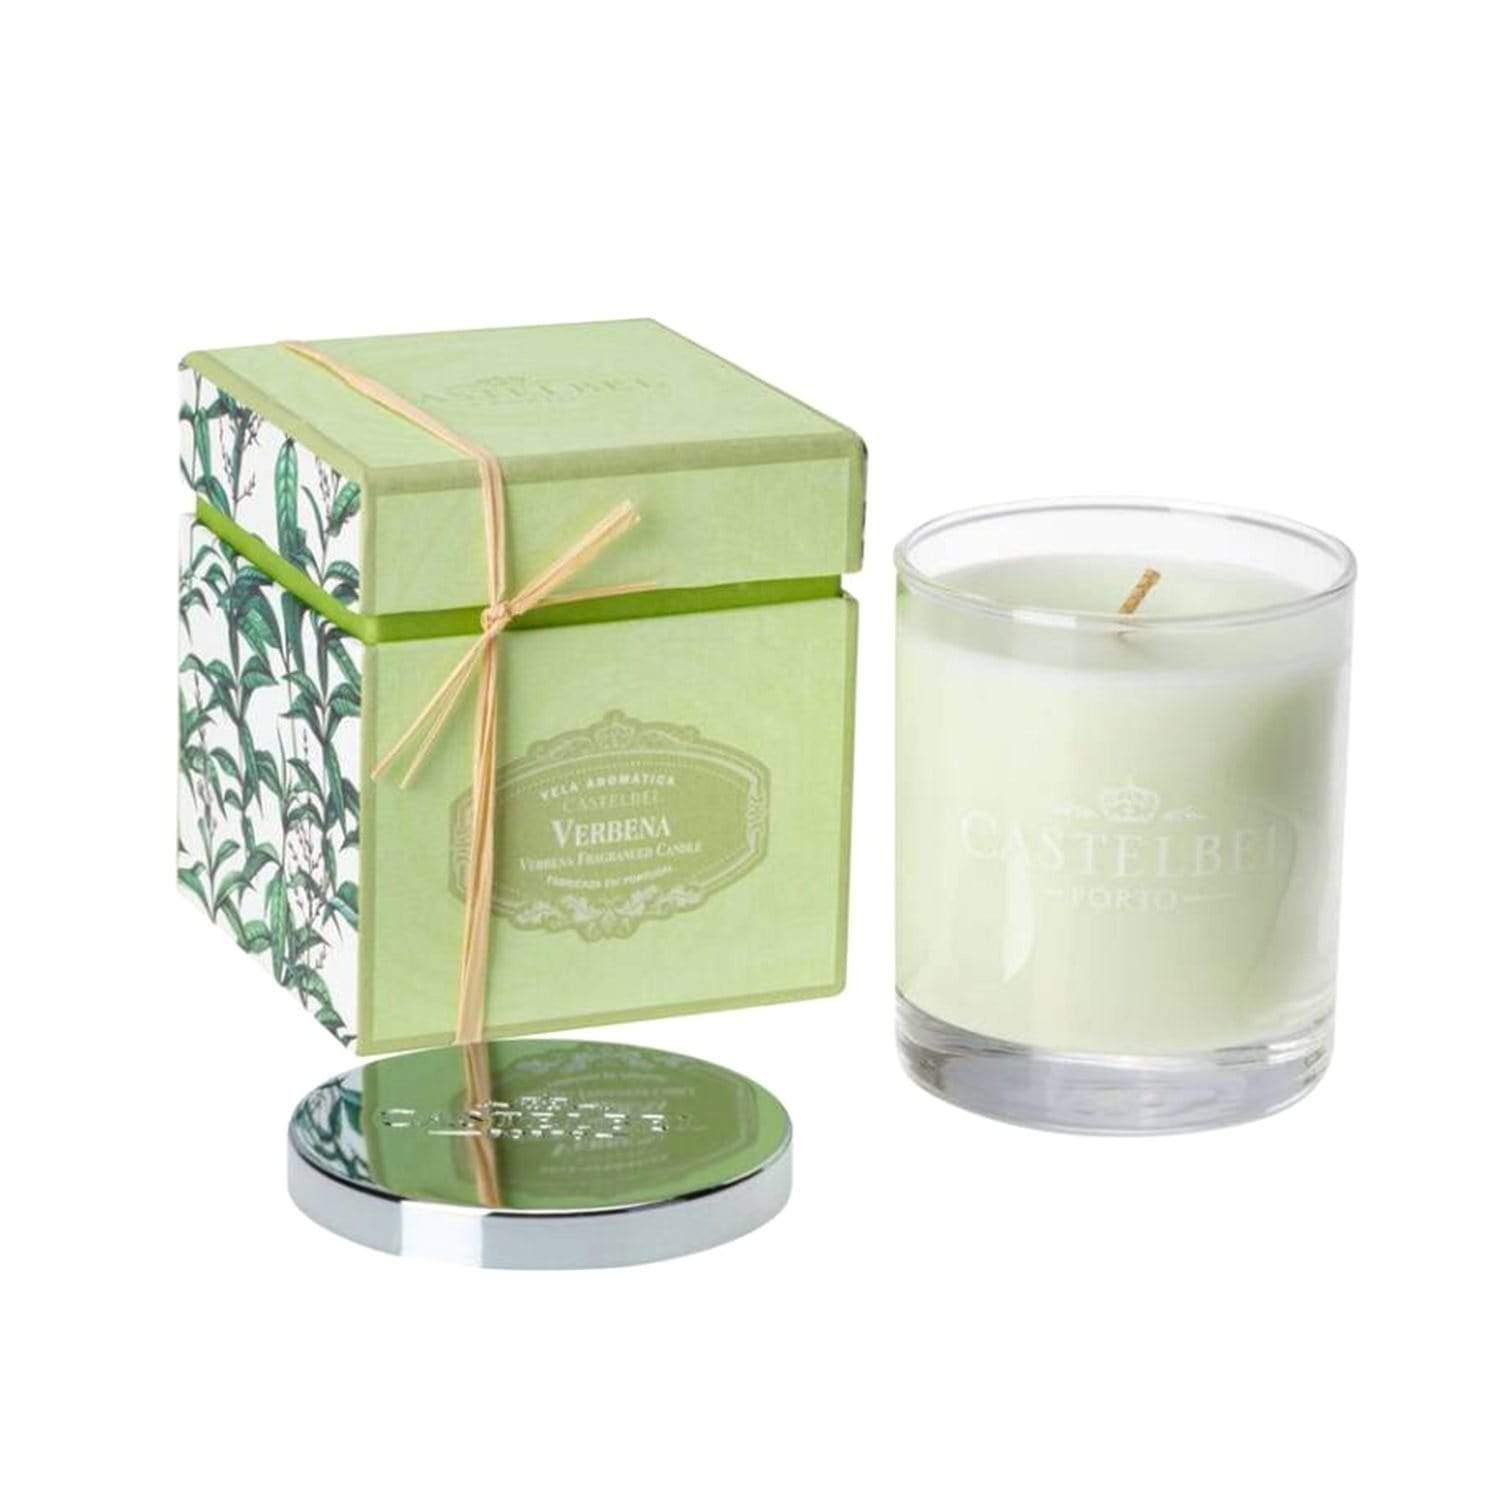 Castelbel Ambiance Verbena Scented Candle - C1-1901 - Jashanmal Home